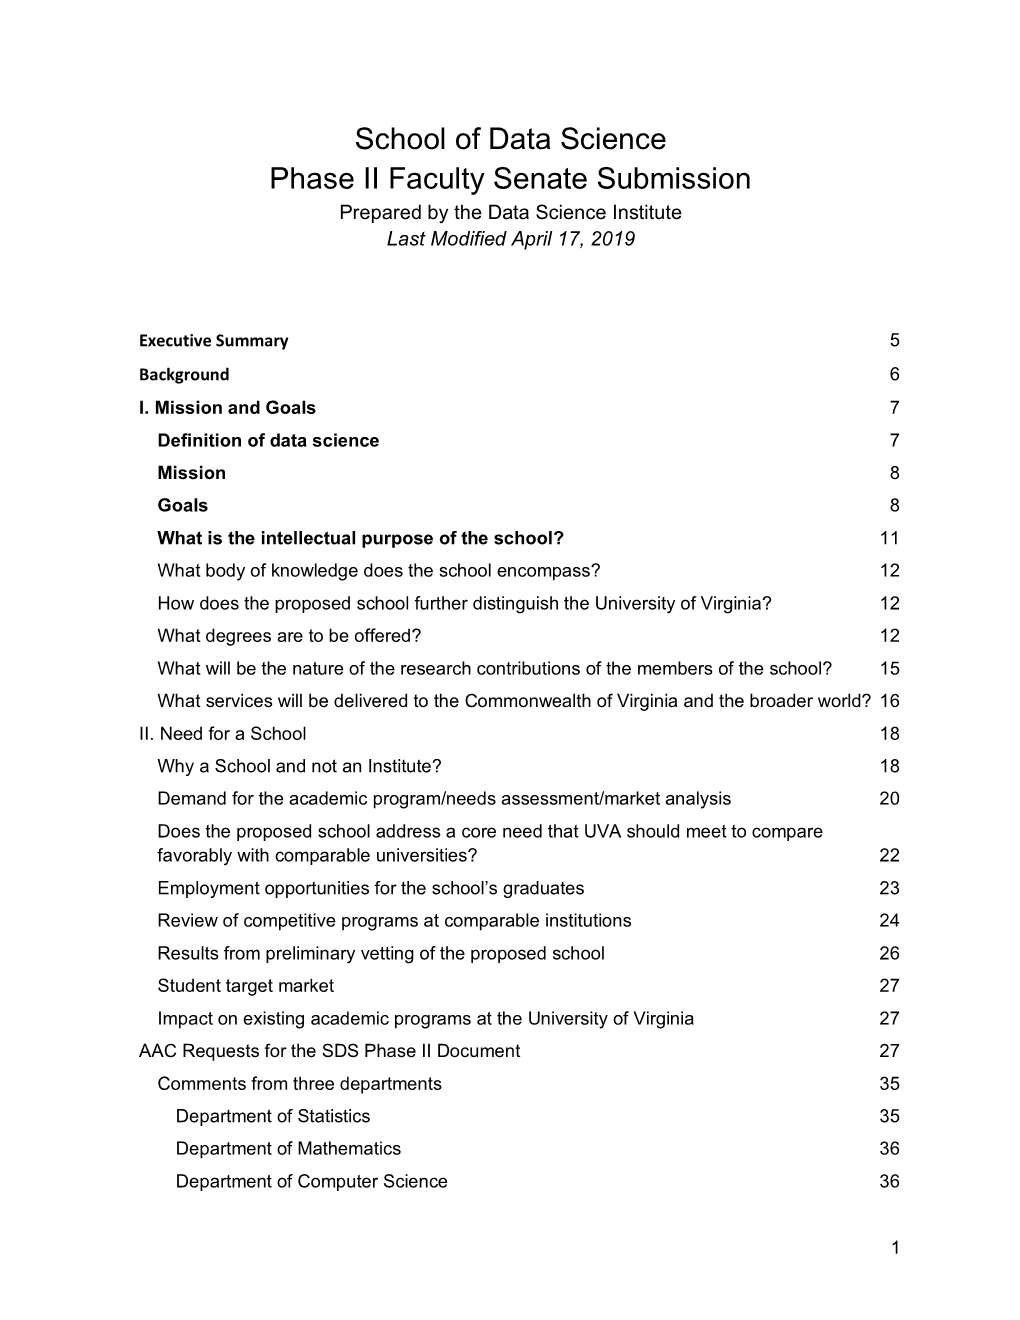 School of Data Science Phase II Faculty Senate Submission Prepared by the Data Science Institute Last Modified April 17, 2019